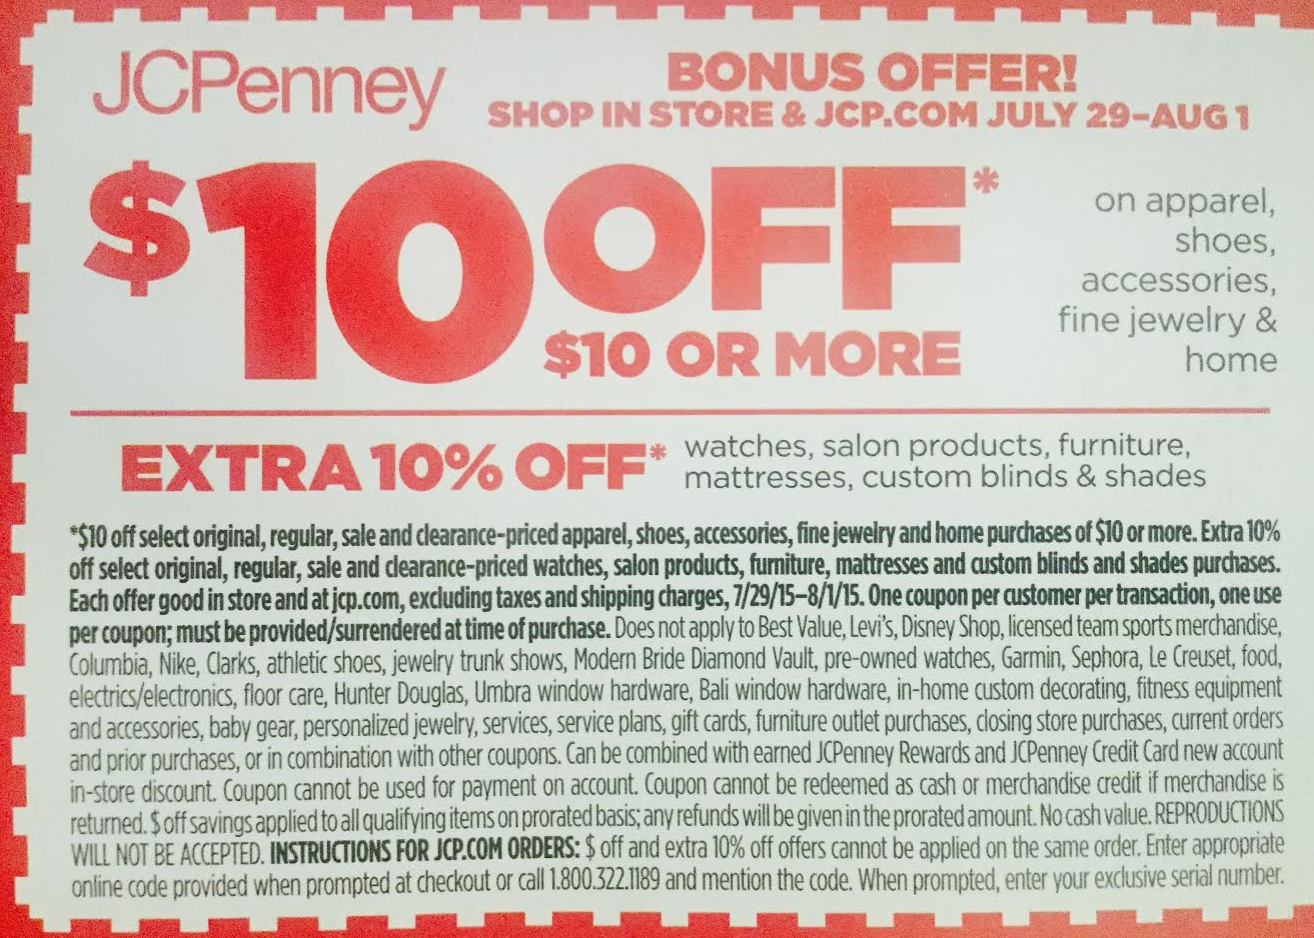 jcpenney shoes coupon